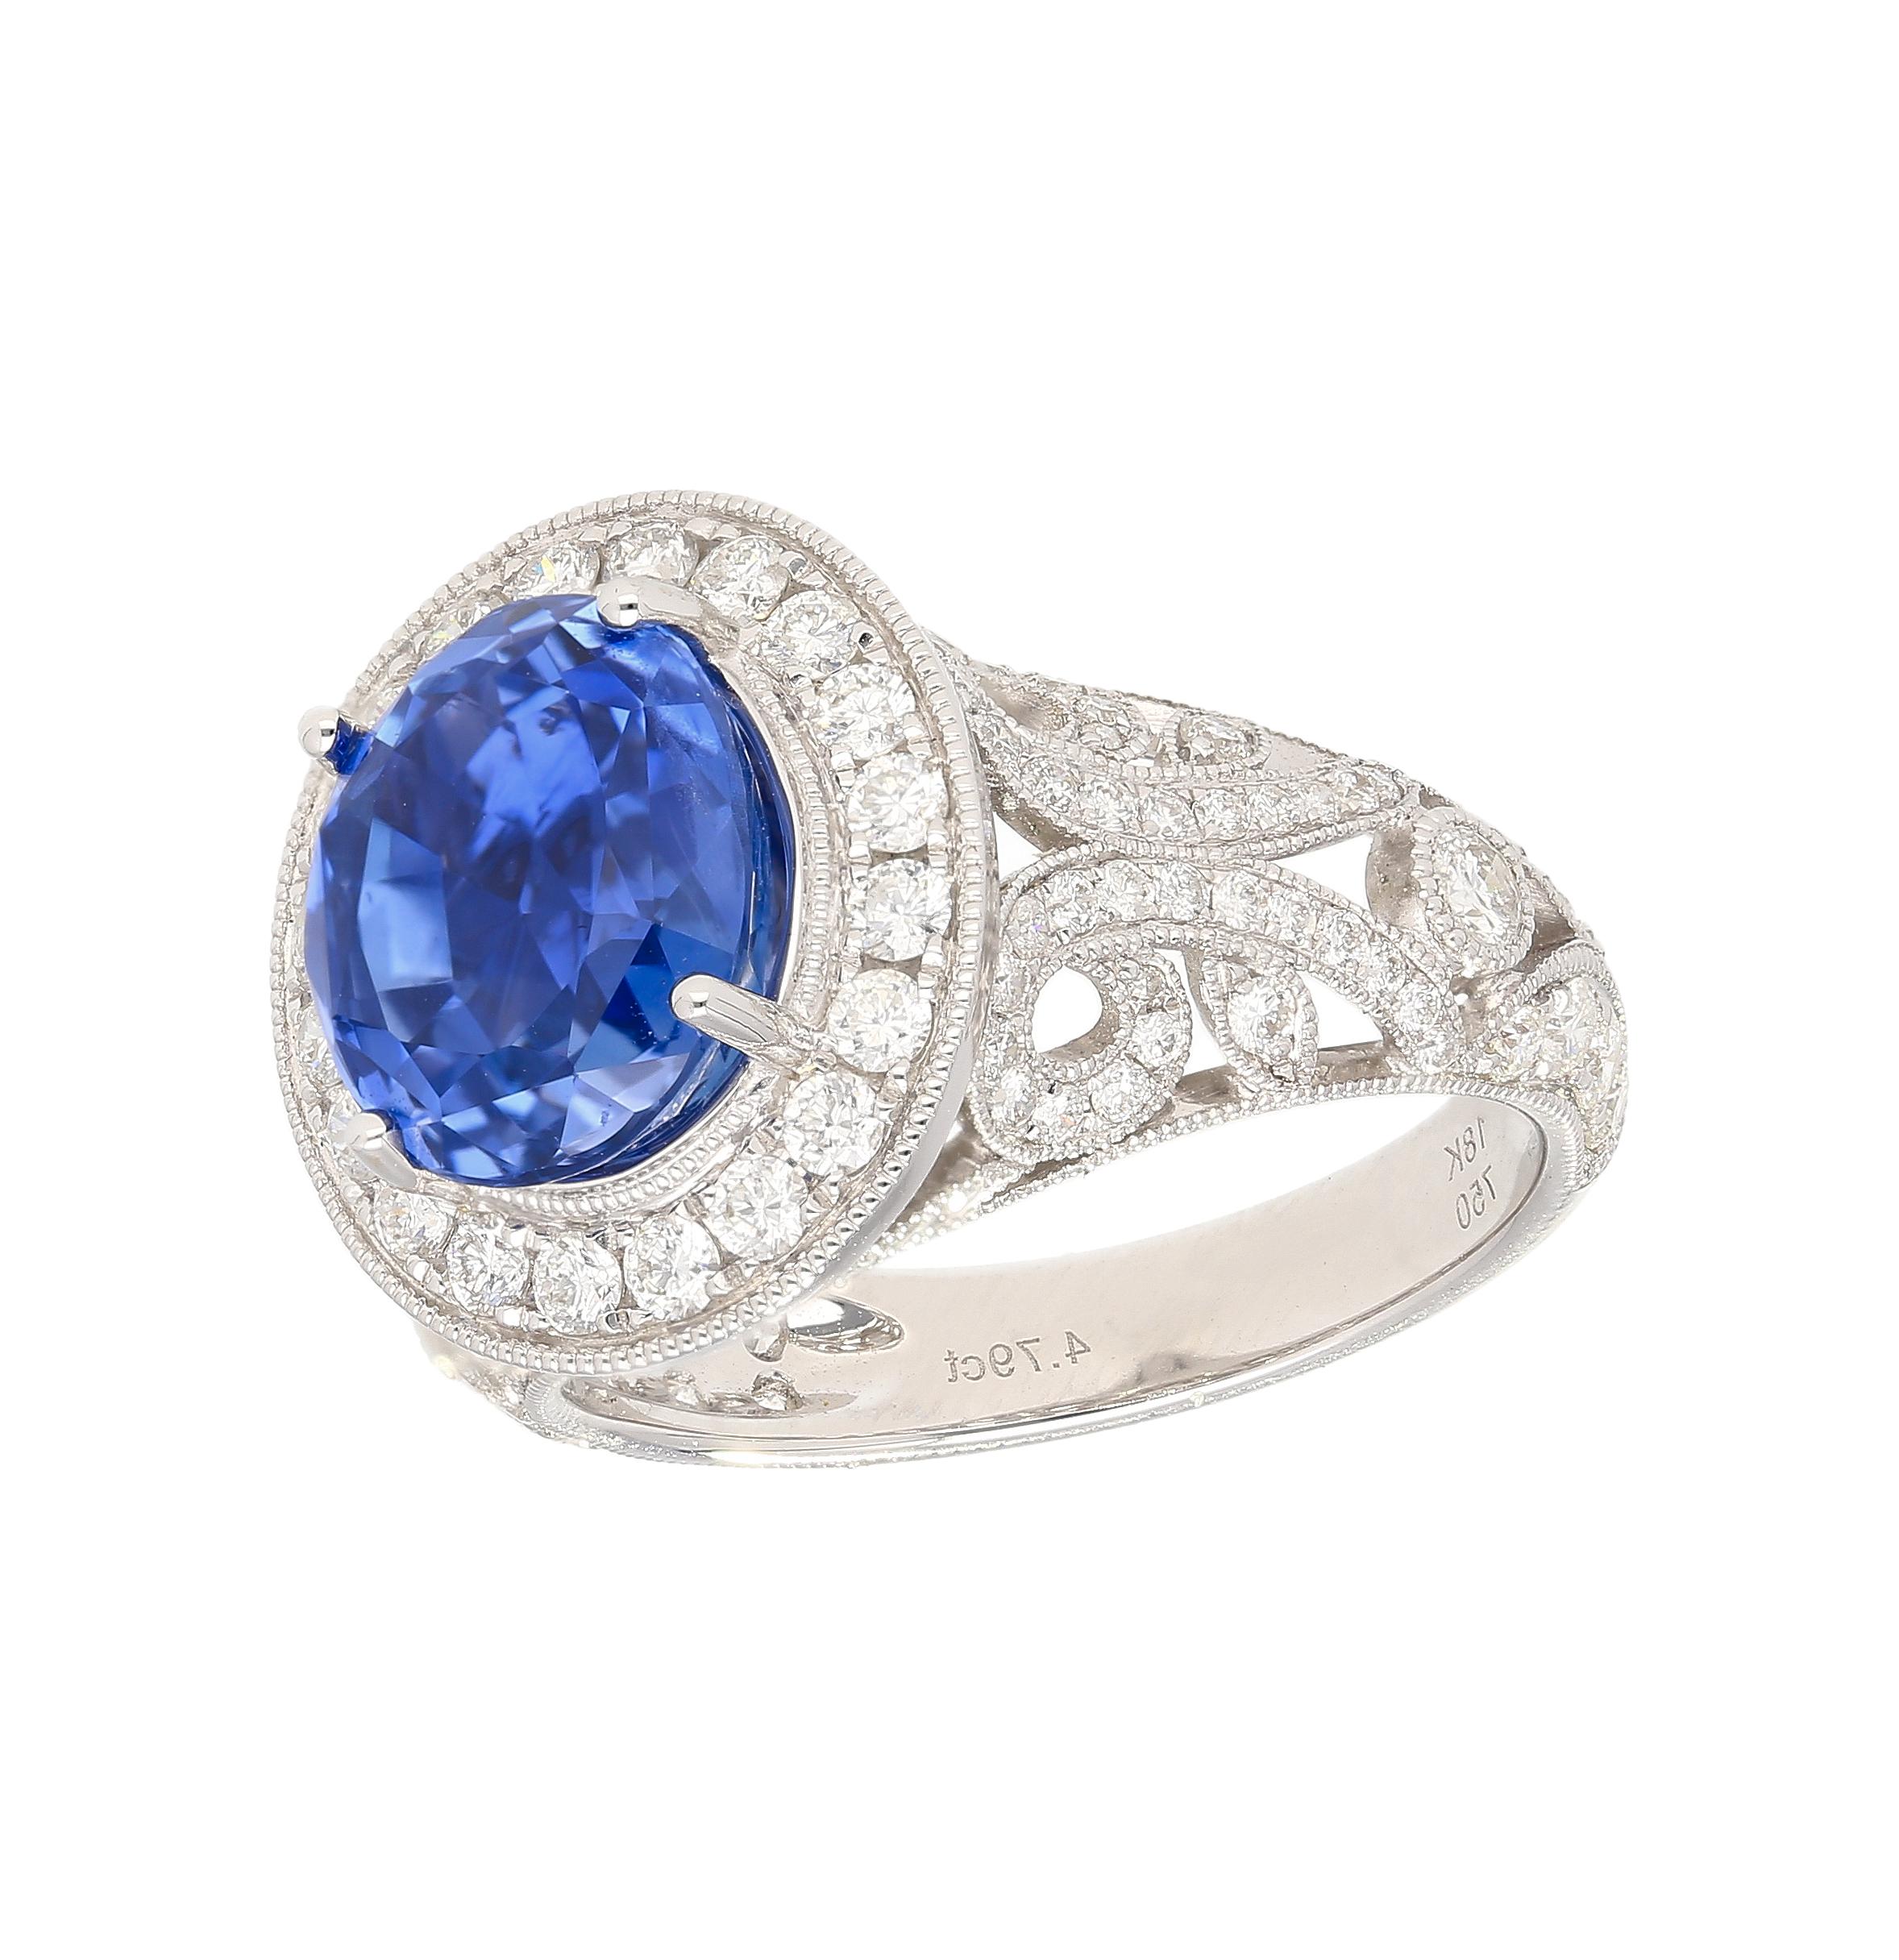 No Heat 4.84 Carat Violet-Blue Ceylon Sapphire with Diamonds in 18K Gold Ring For Sale 3